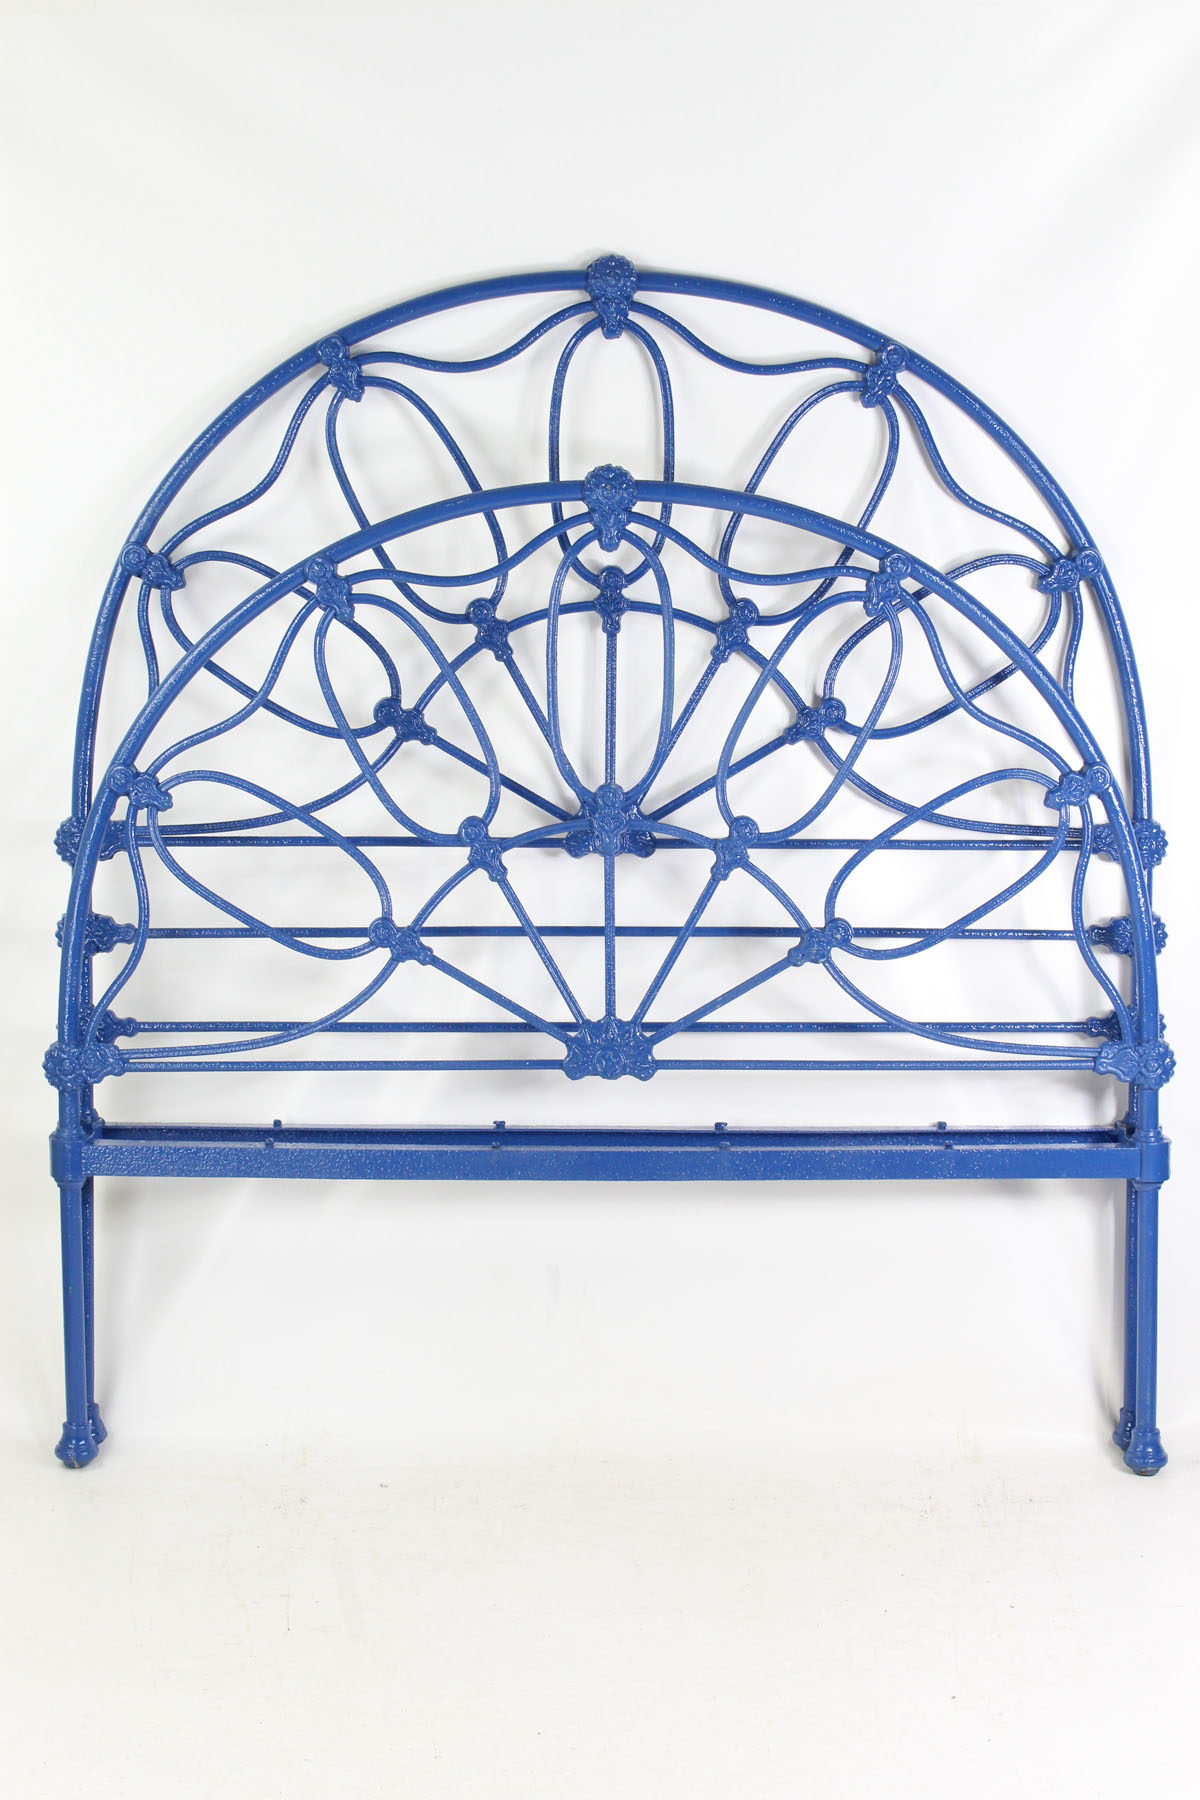 Victorian Iron Double Bed